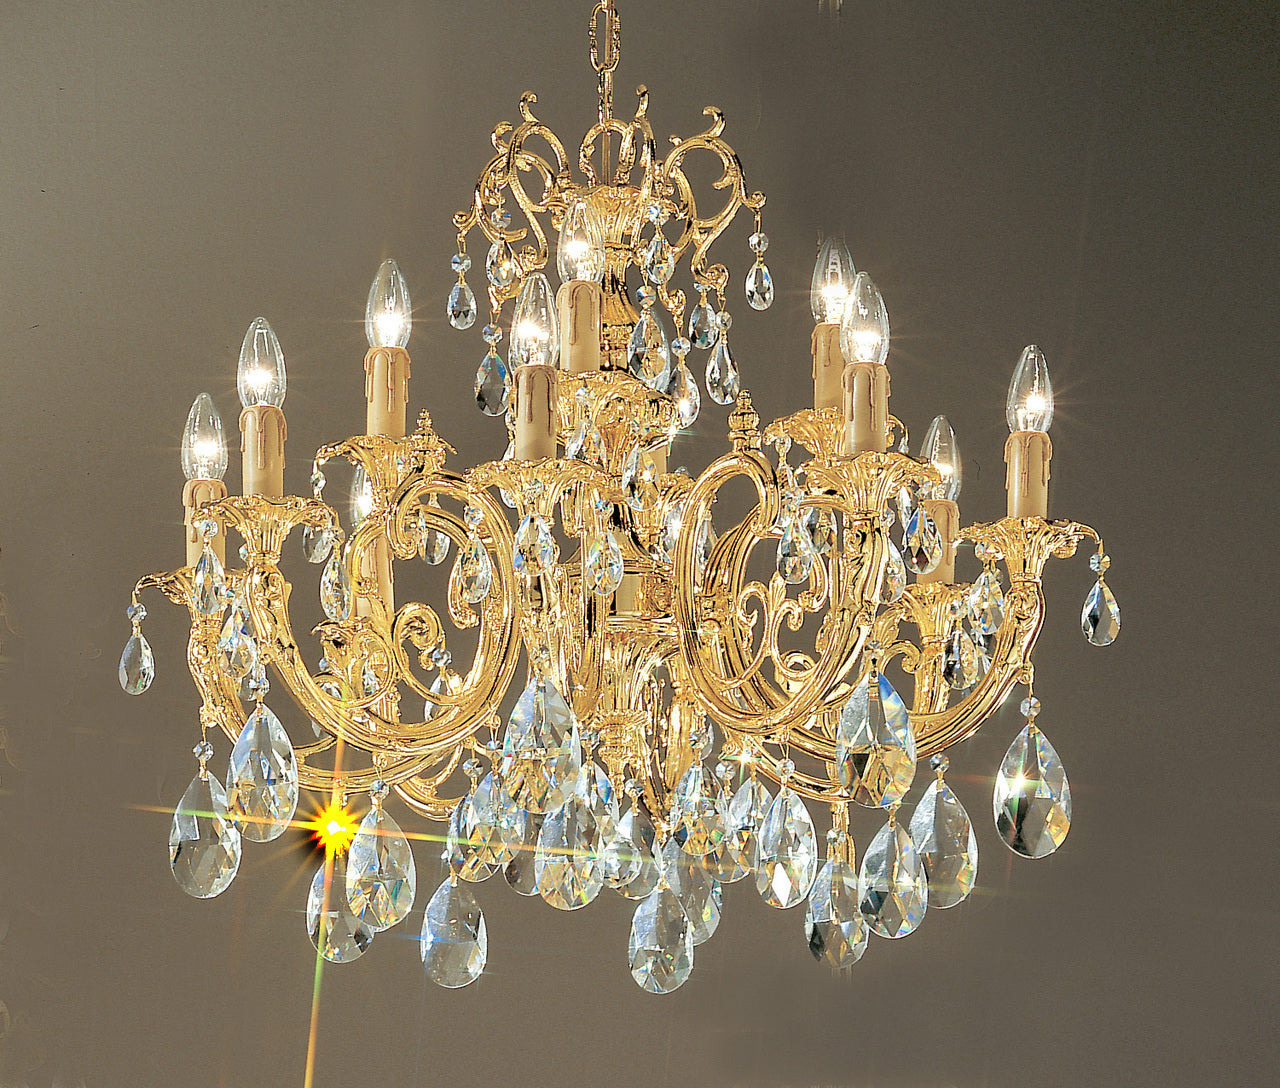 Classic Lighting 5712 G S Princeton Crystal/Cast Brass Chandelier in 24k Gold (Imported from Spain)